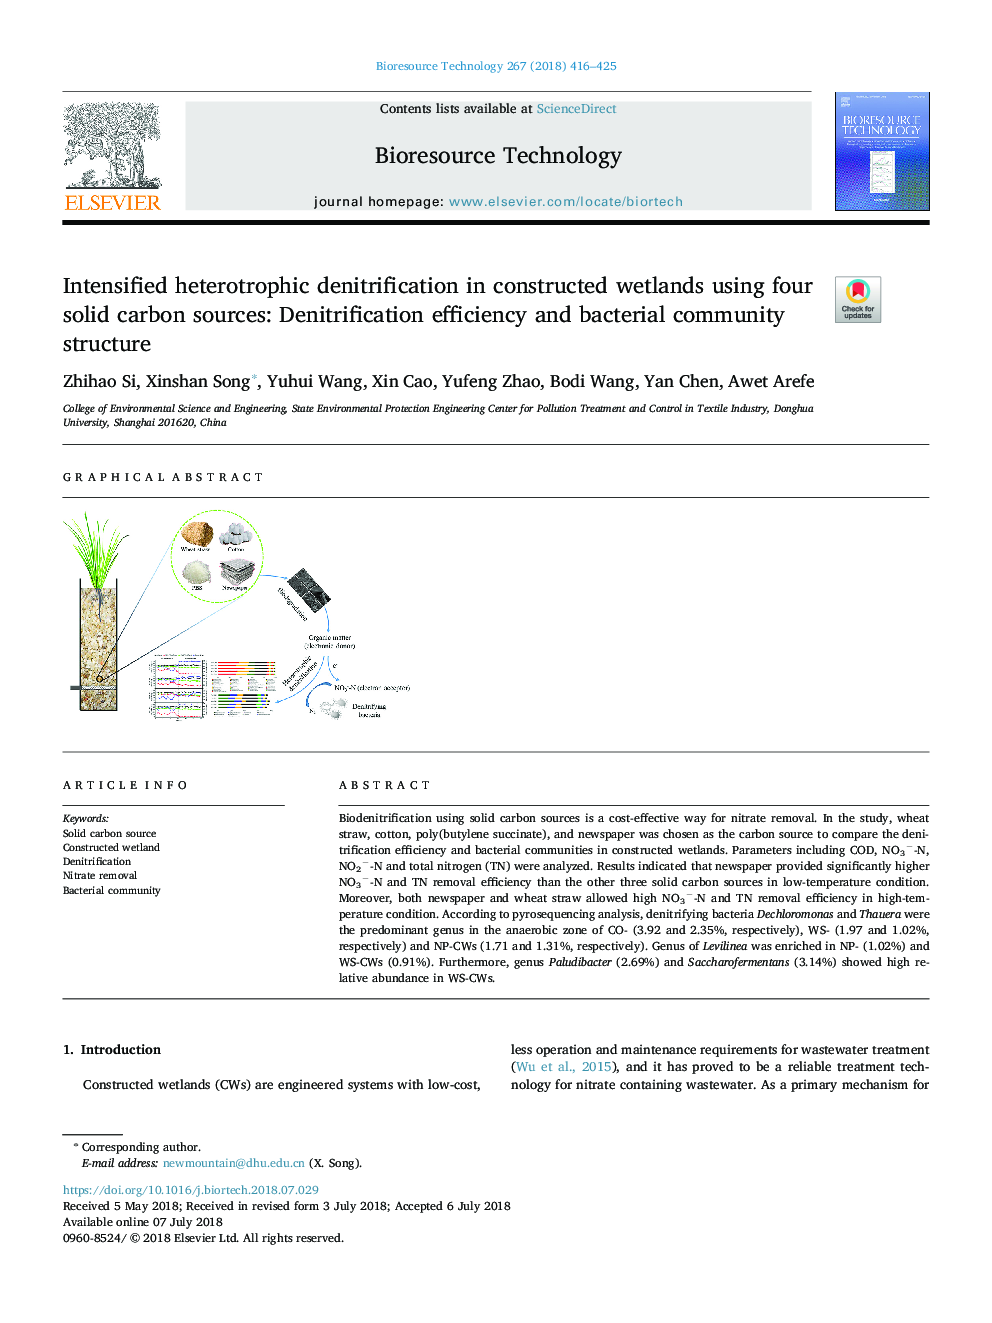 Intensified heterotrophic denitrification in constructed wetlands using four solid carbon sources: Denitrification efficiency and bacterial community structure